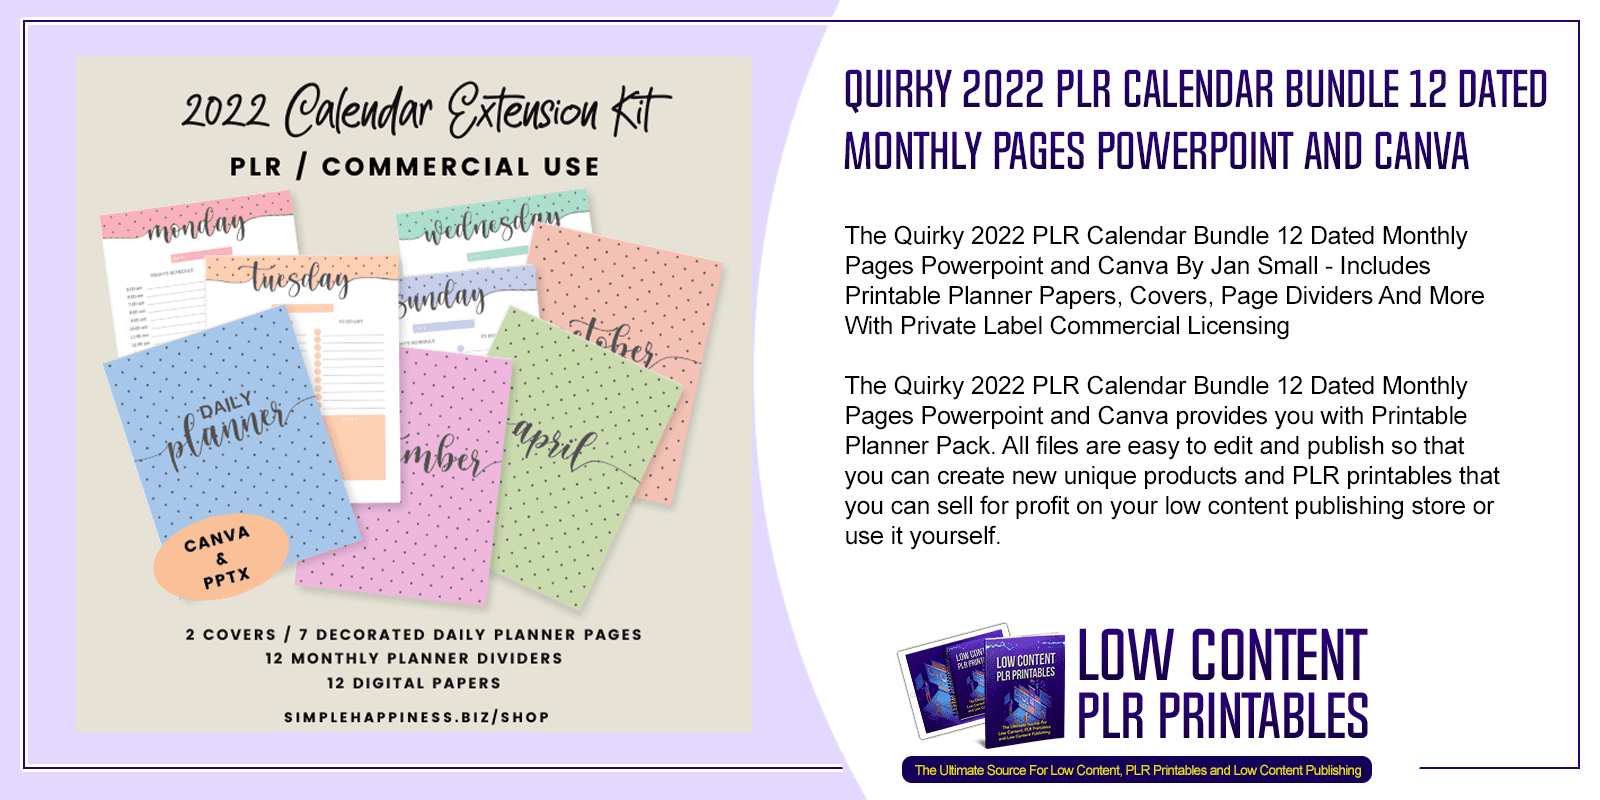 Quirky 2022 PLR Calendar Bundle 12 Dated Monthly Pages Powerpoint and Canva